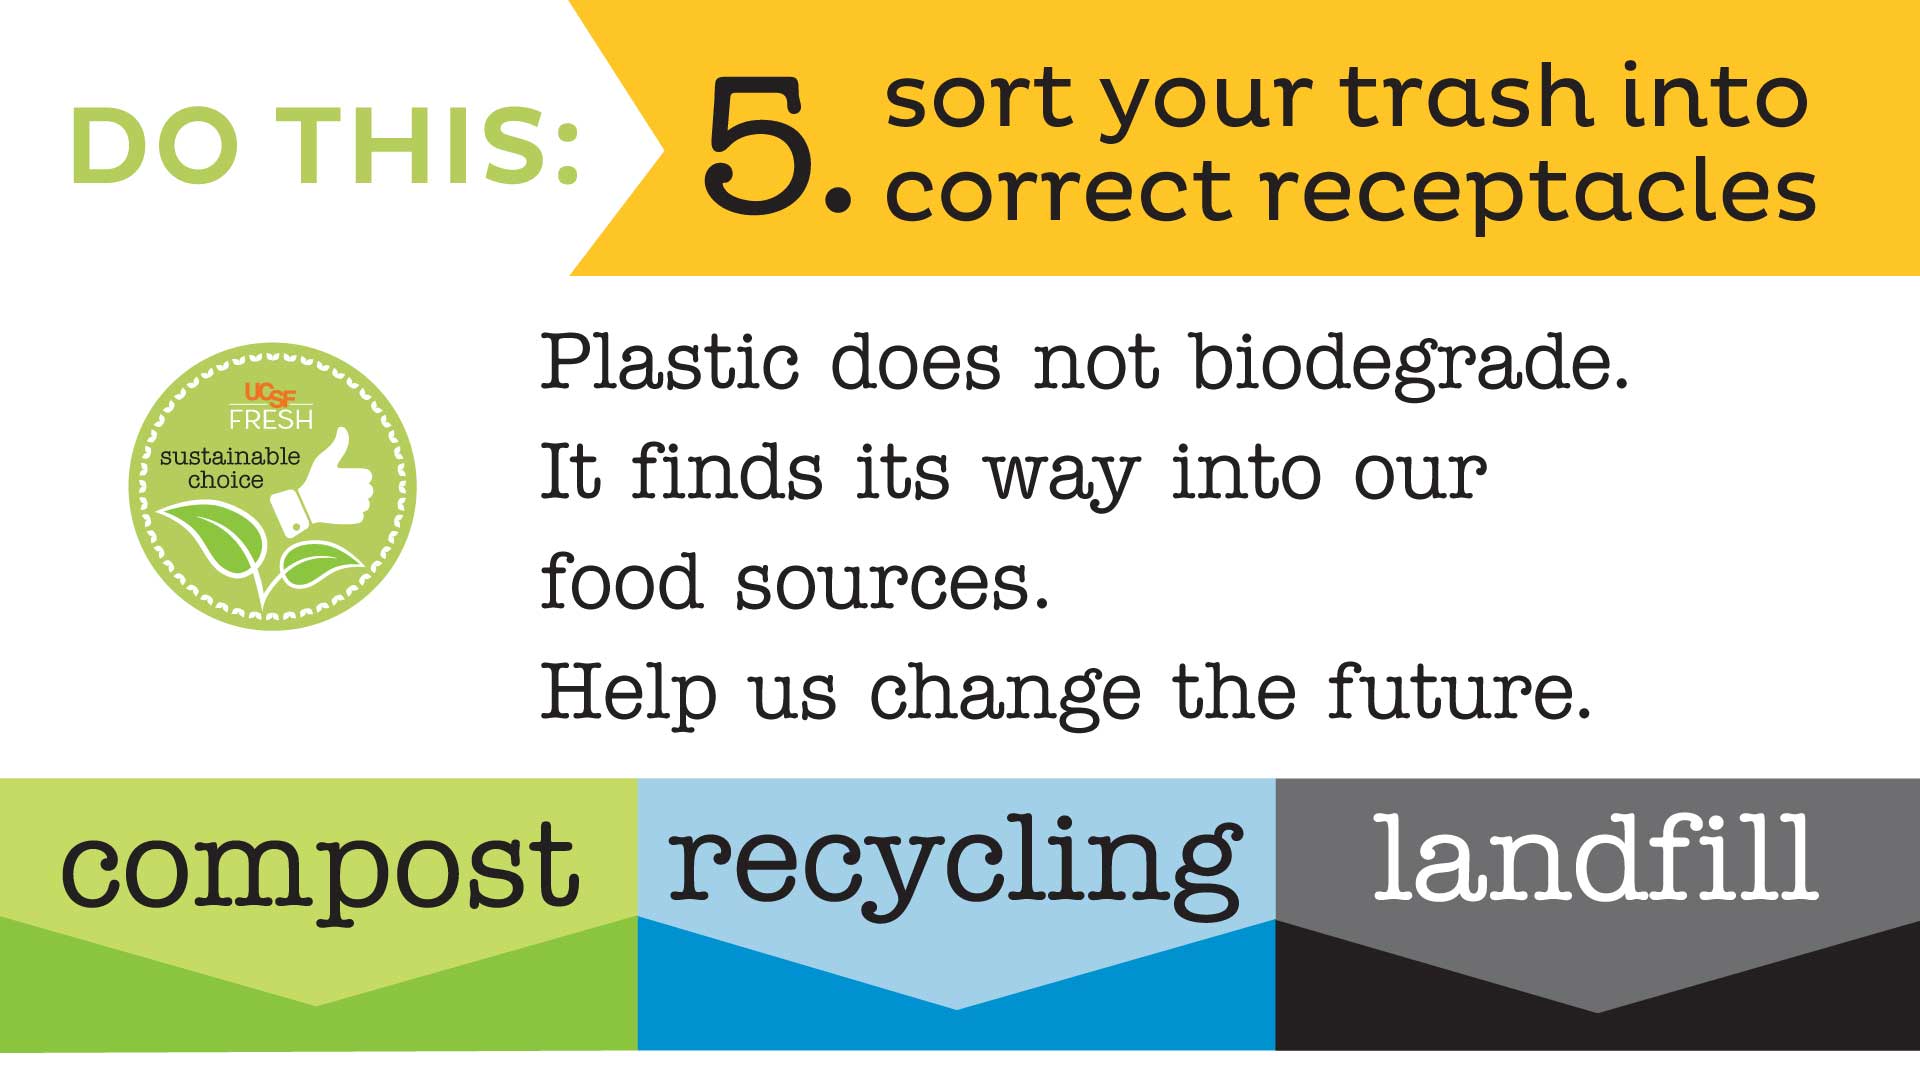 Sort your trash into correct receptacles